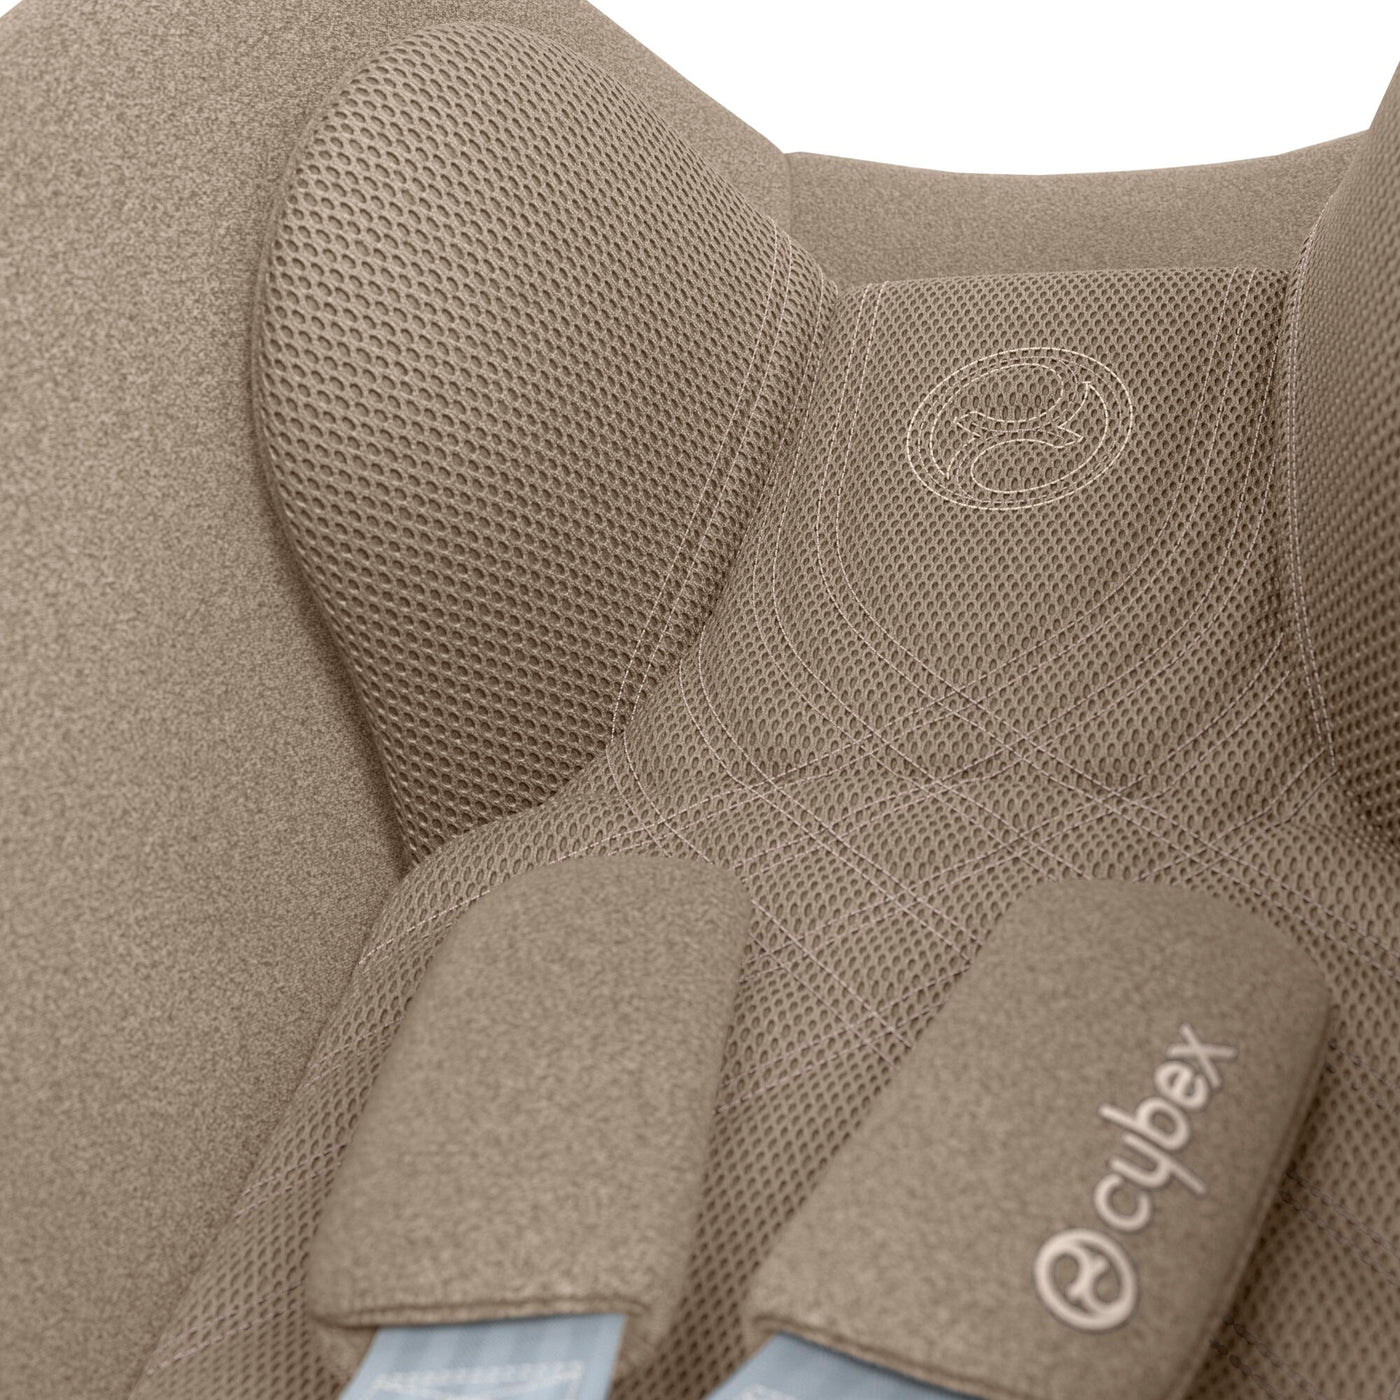 cybex cloud t i-size car seat in cosy beige plus fabric with mesh ventilation 